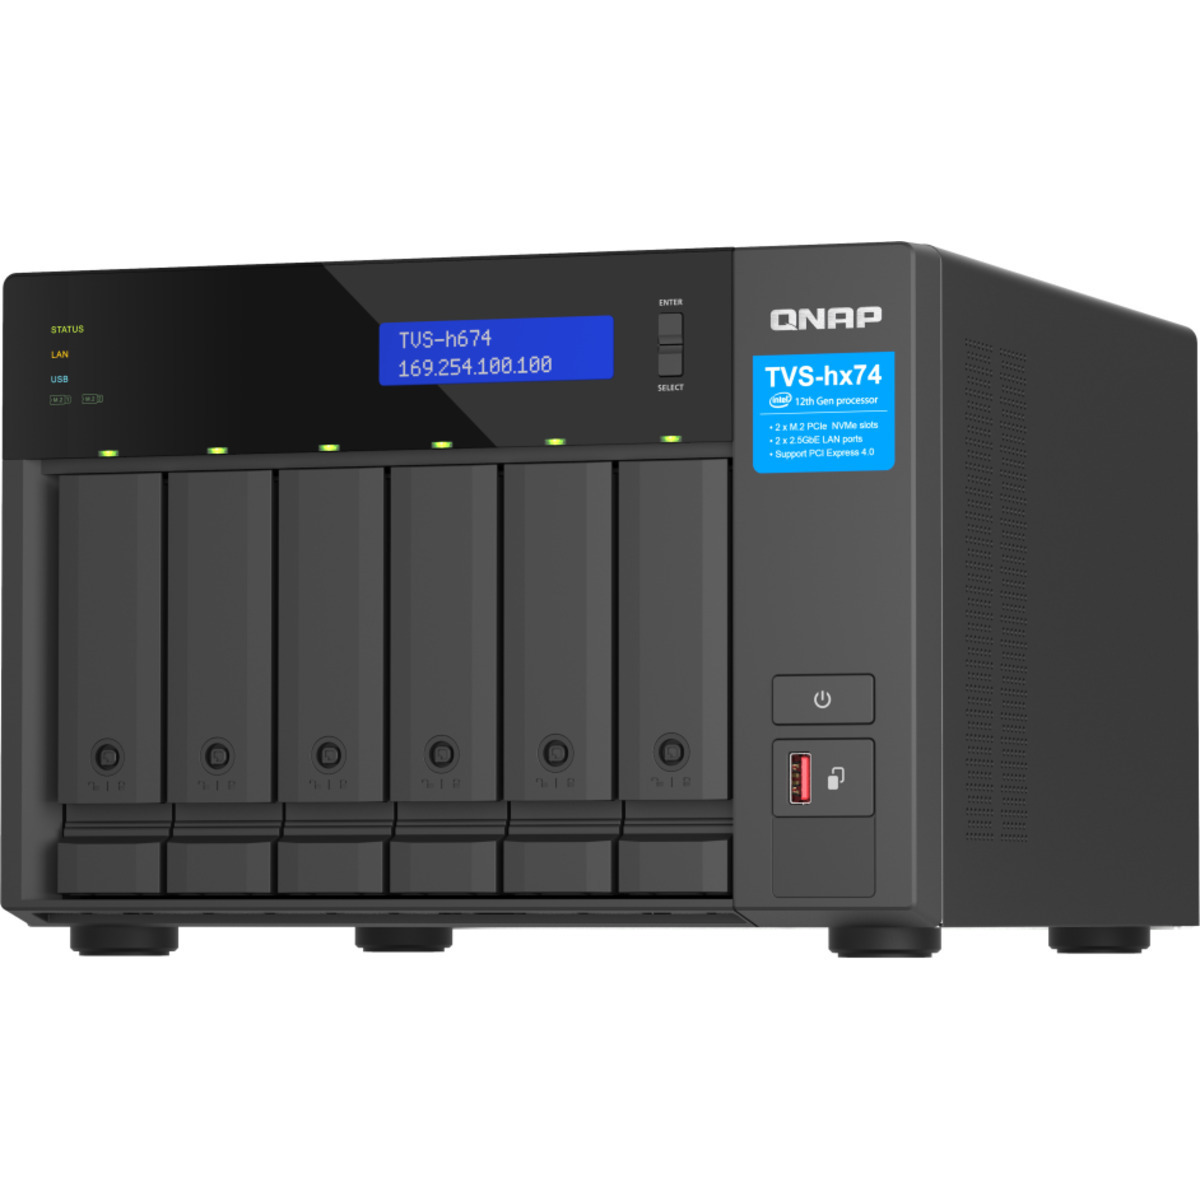 buy QNAP TVS-h674 Core i5 6tb Desktop NAS - Network Attached Storage Device 6x1000gb Samsung 870 EVO MZ-77E1T0BAM 2.5 560/530MB/s SATA 6Gb/s SSD CONSUMER Class Drives Installed - Burn-In Tested - nas headquarters buy network attached storage server device das new raid-5 free shipping simply usa TVS-h674 Core i5